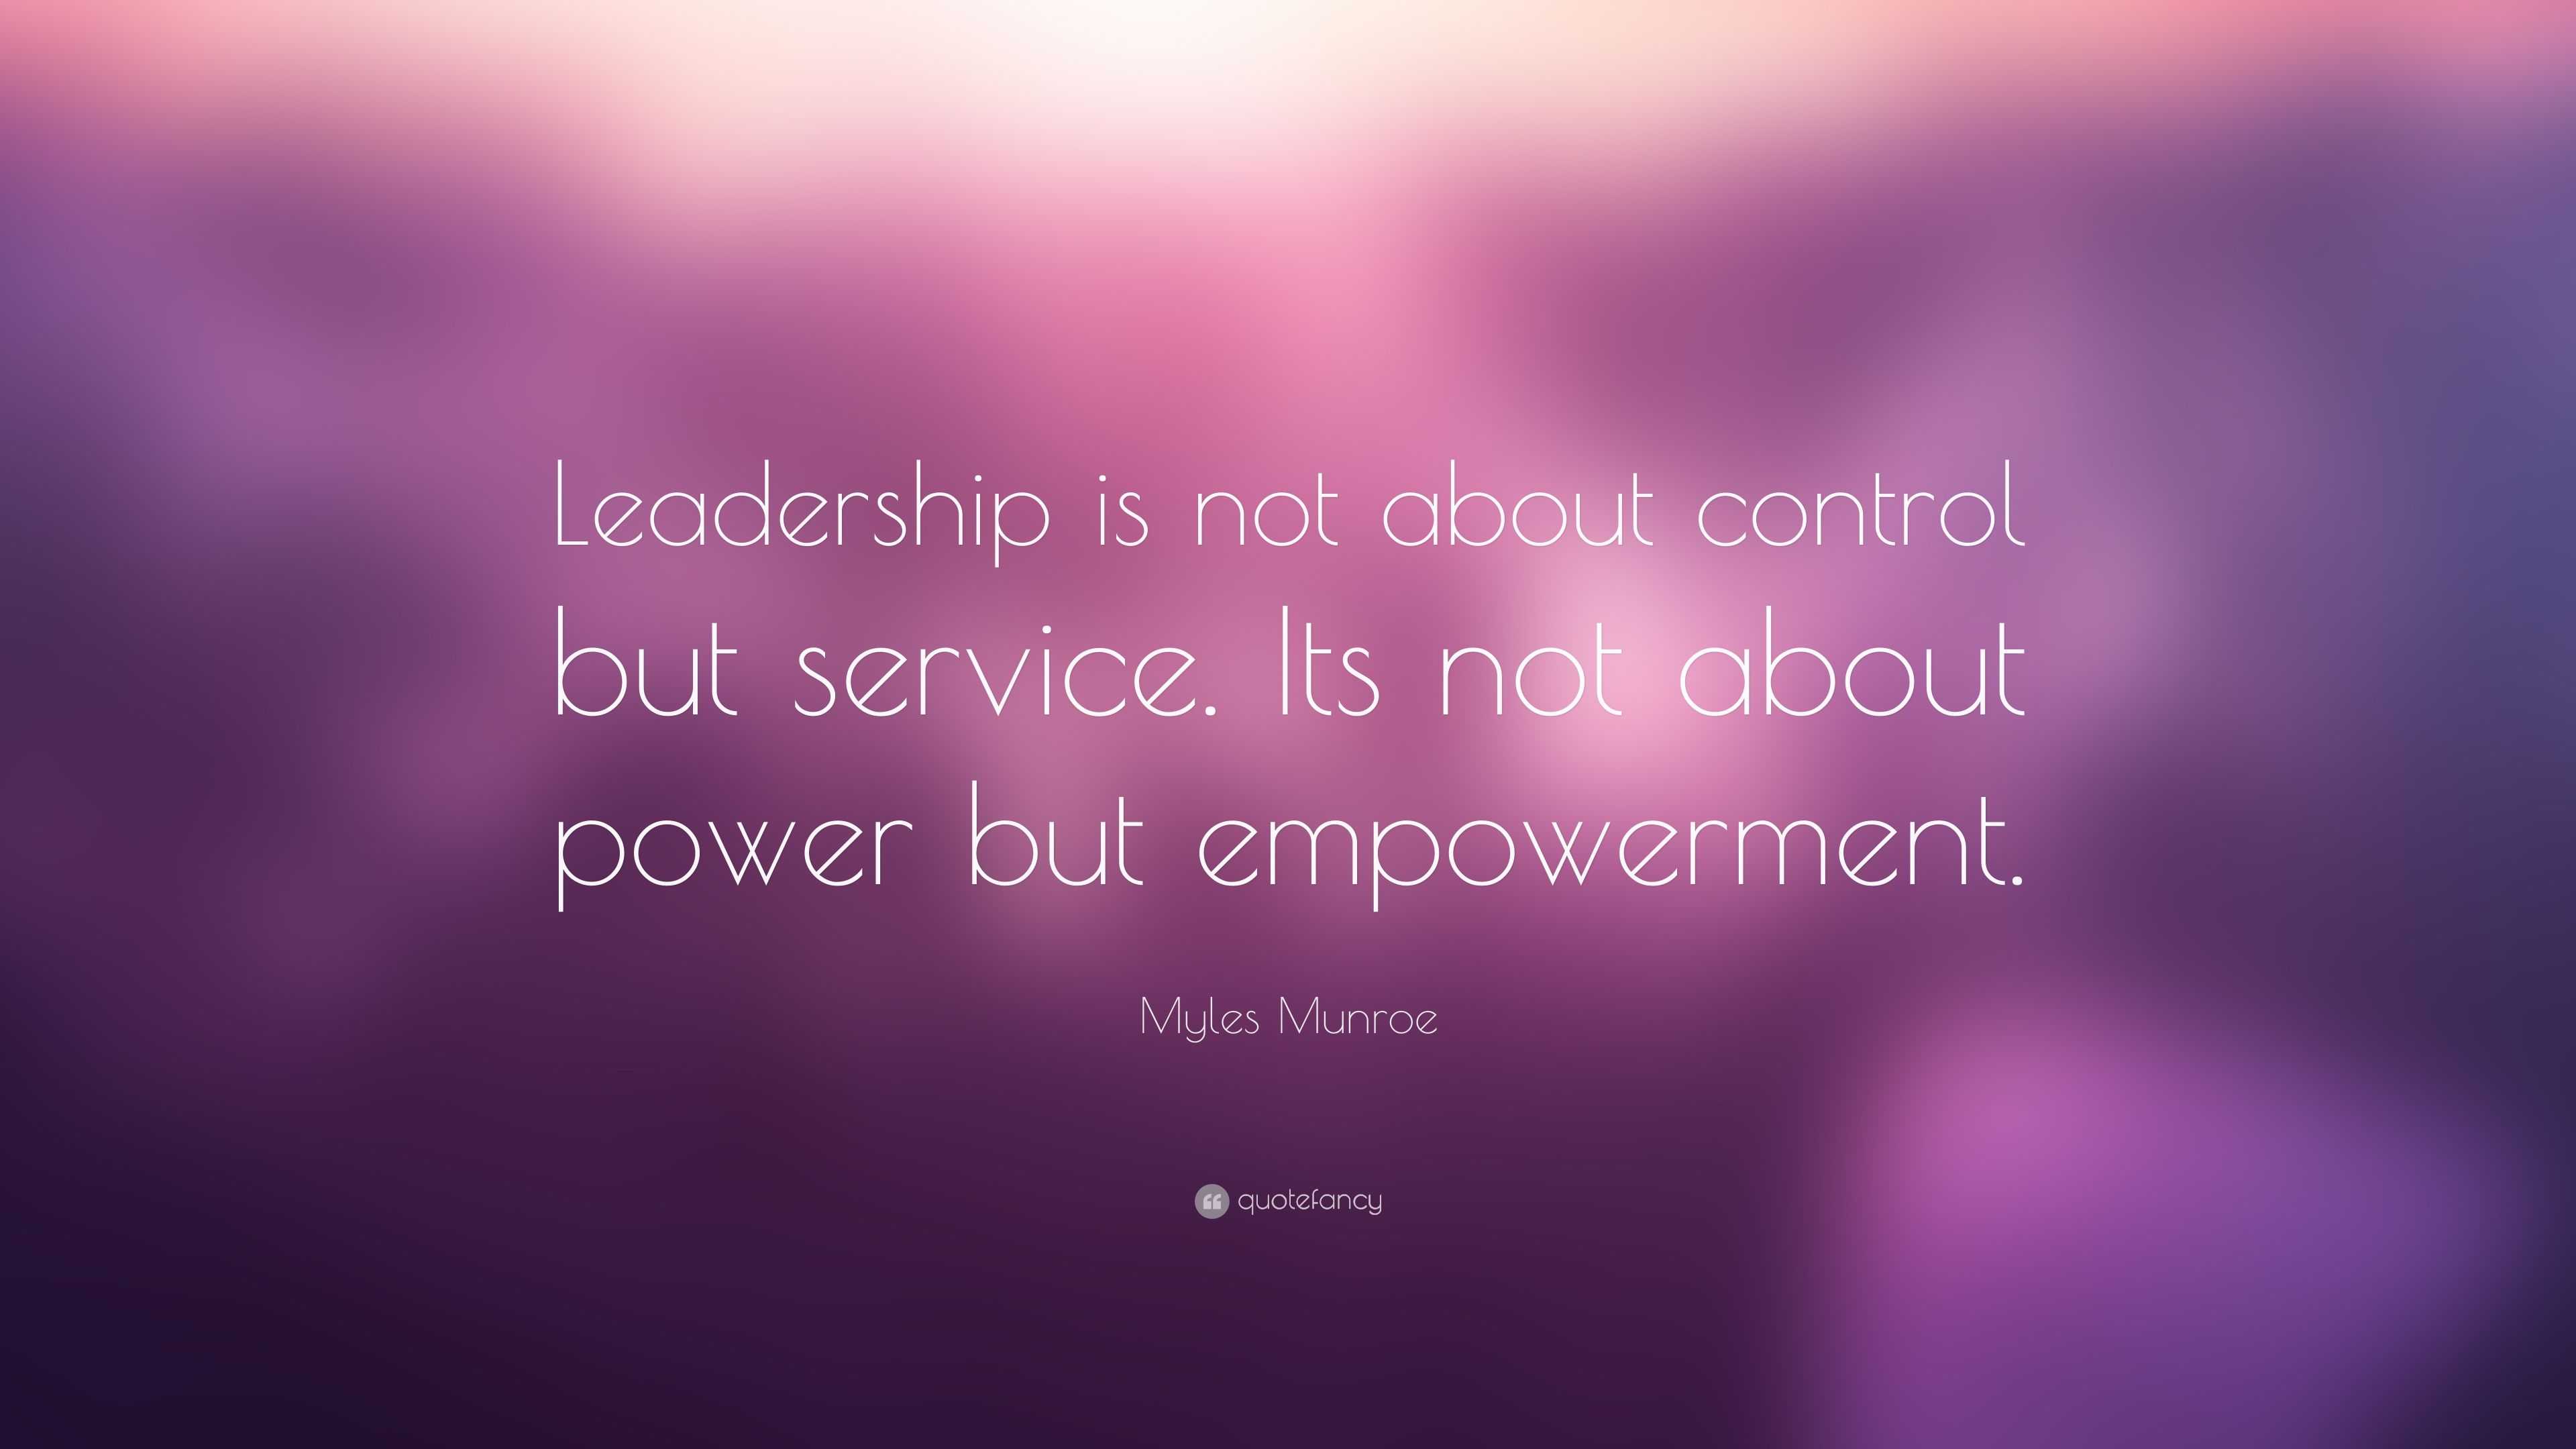 Myles Munroe Quote: “Leadership is not about control but service. Its